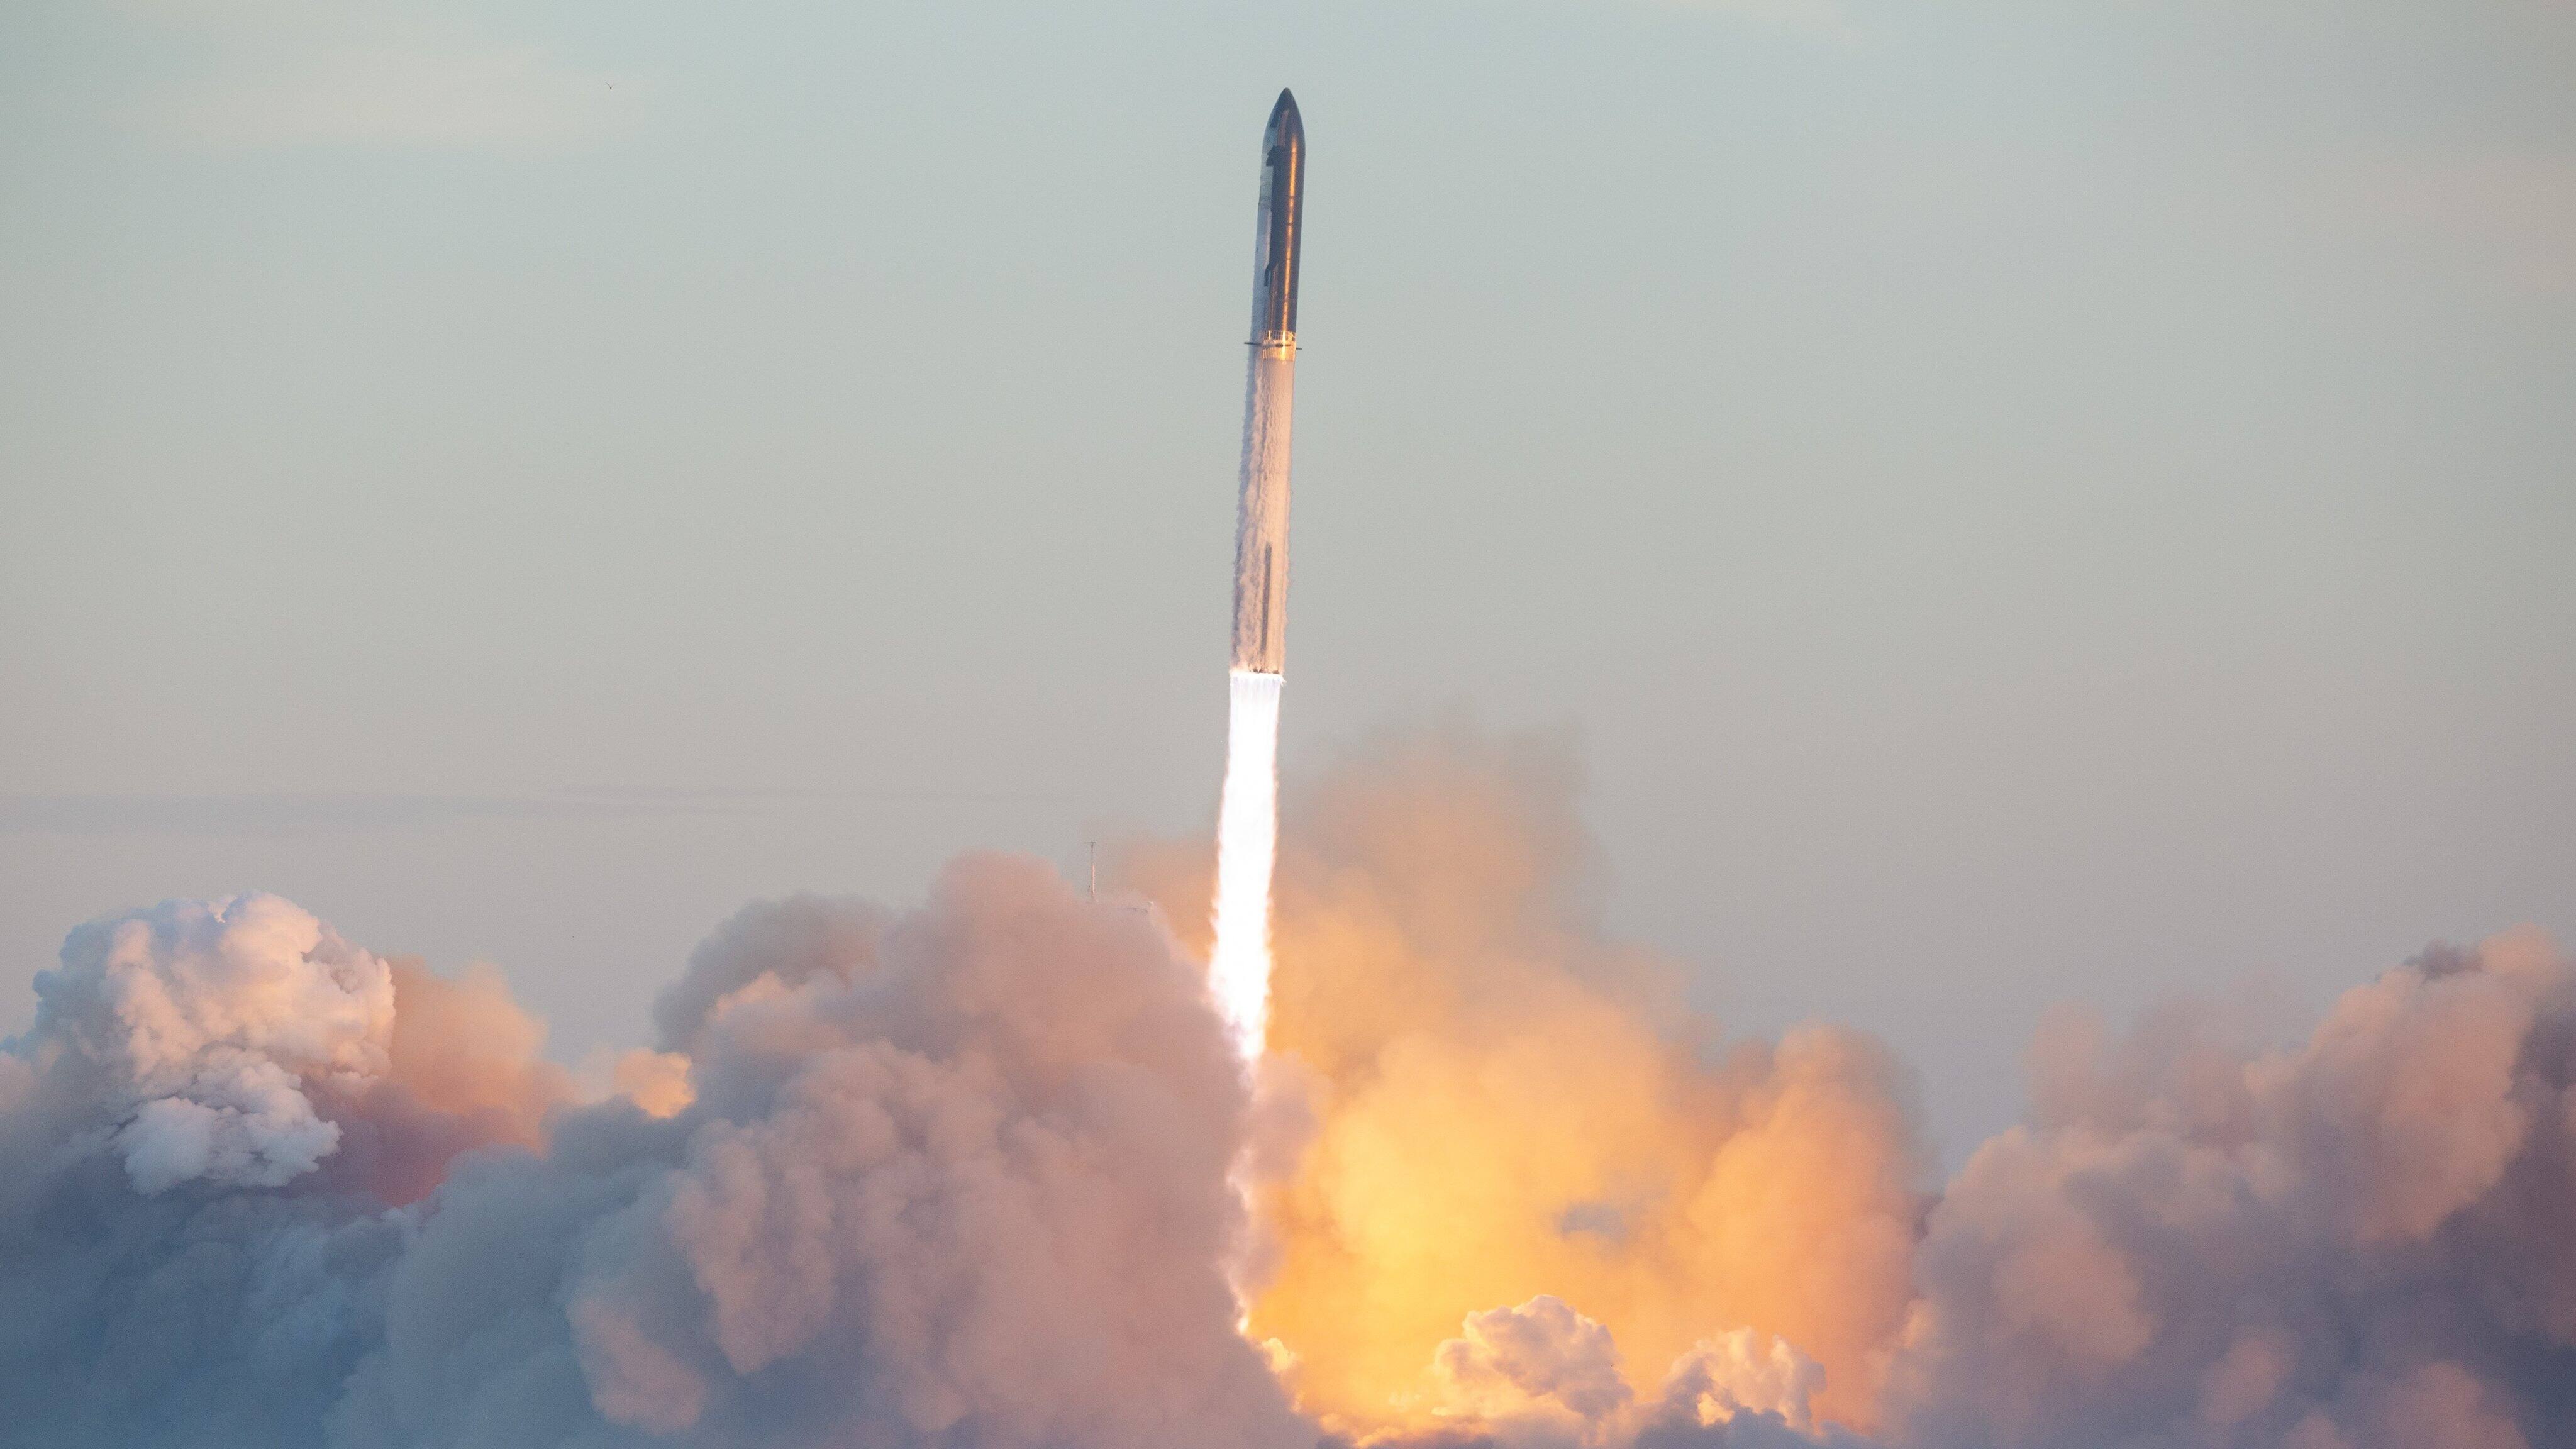 SpaceX Launches New Powerful Rocket But Communication Is Lost Soon After Launch bsm